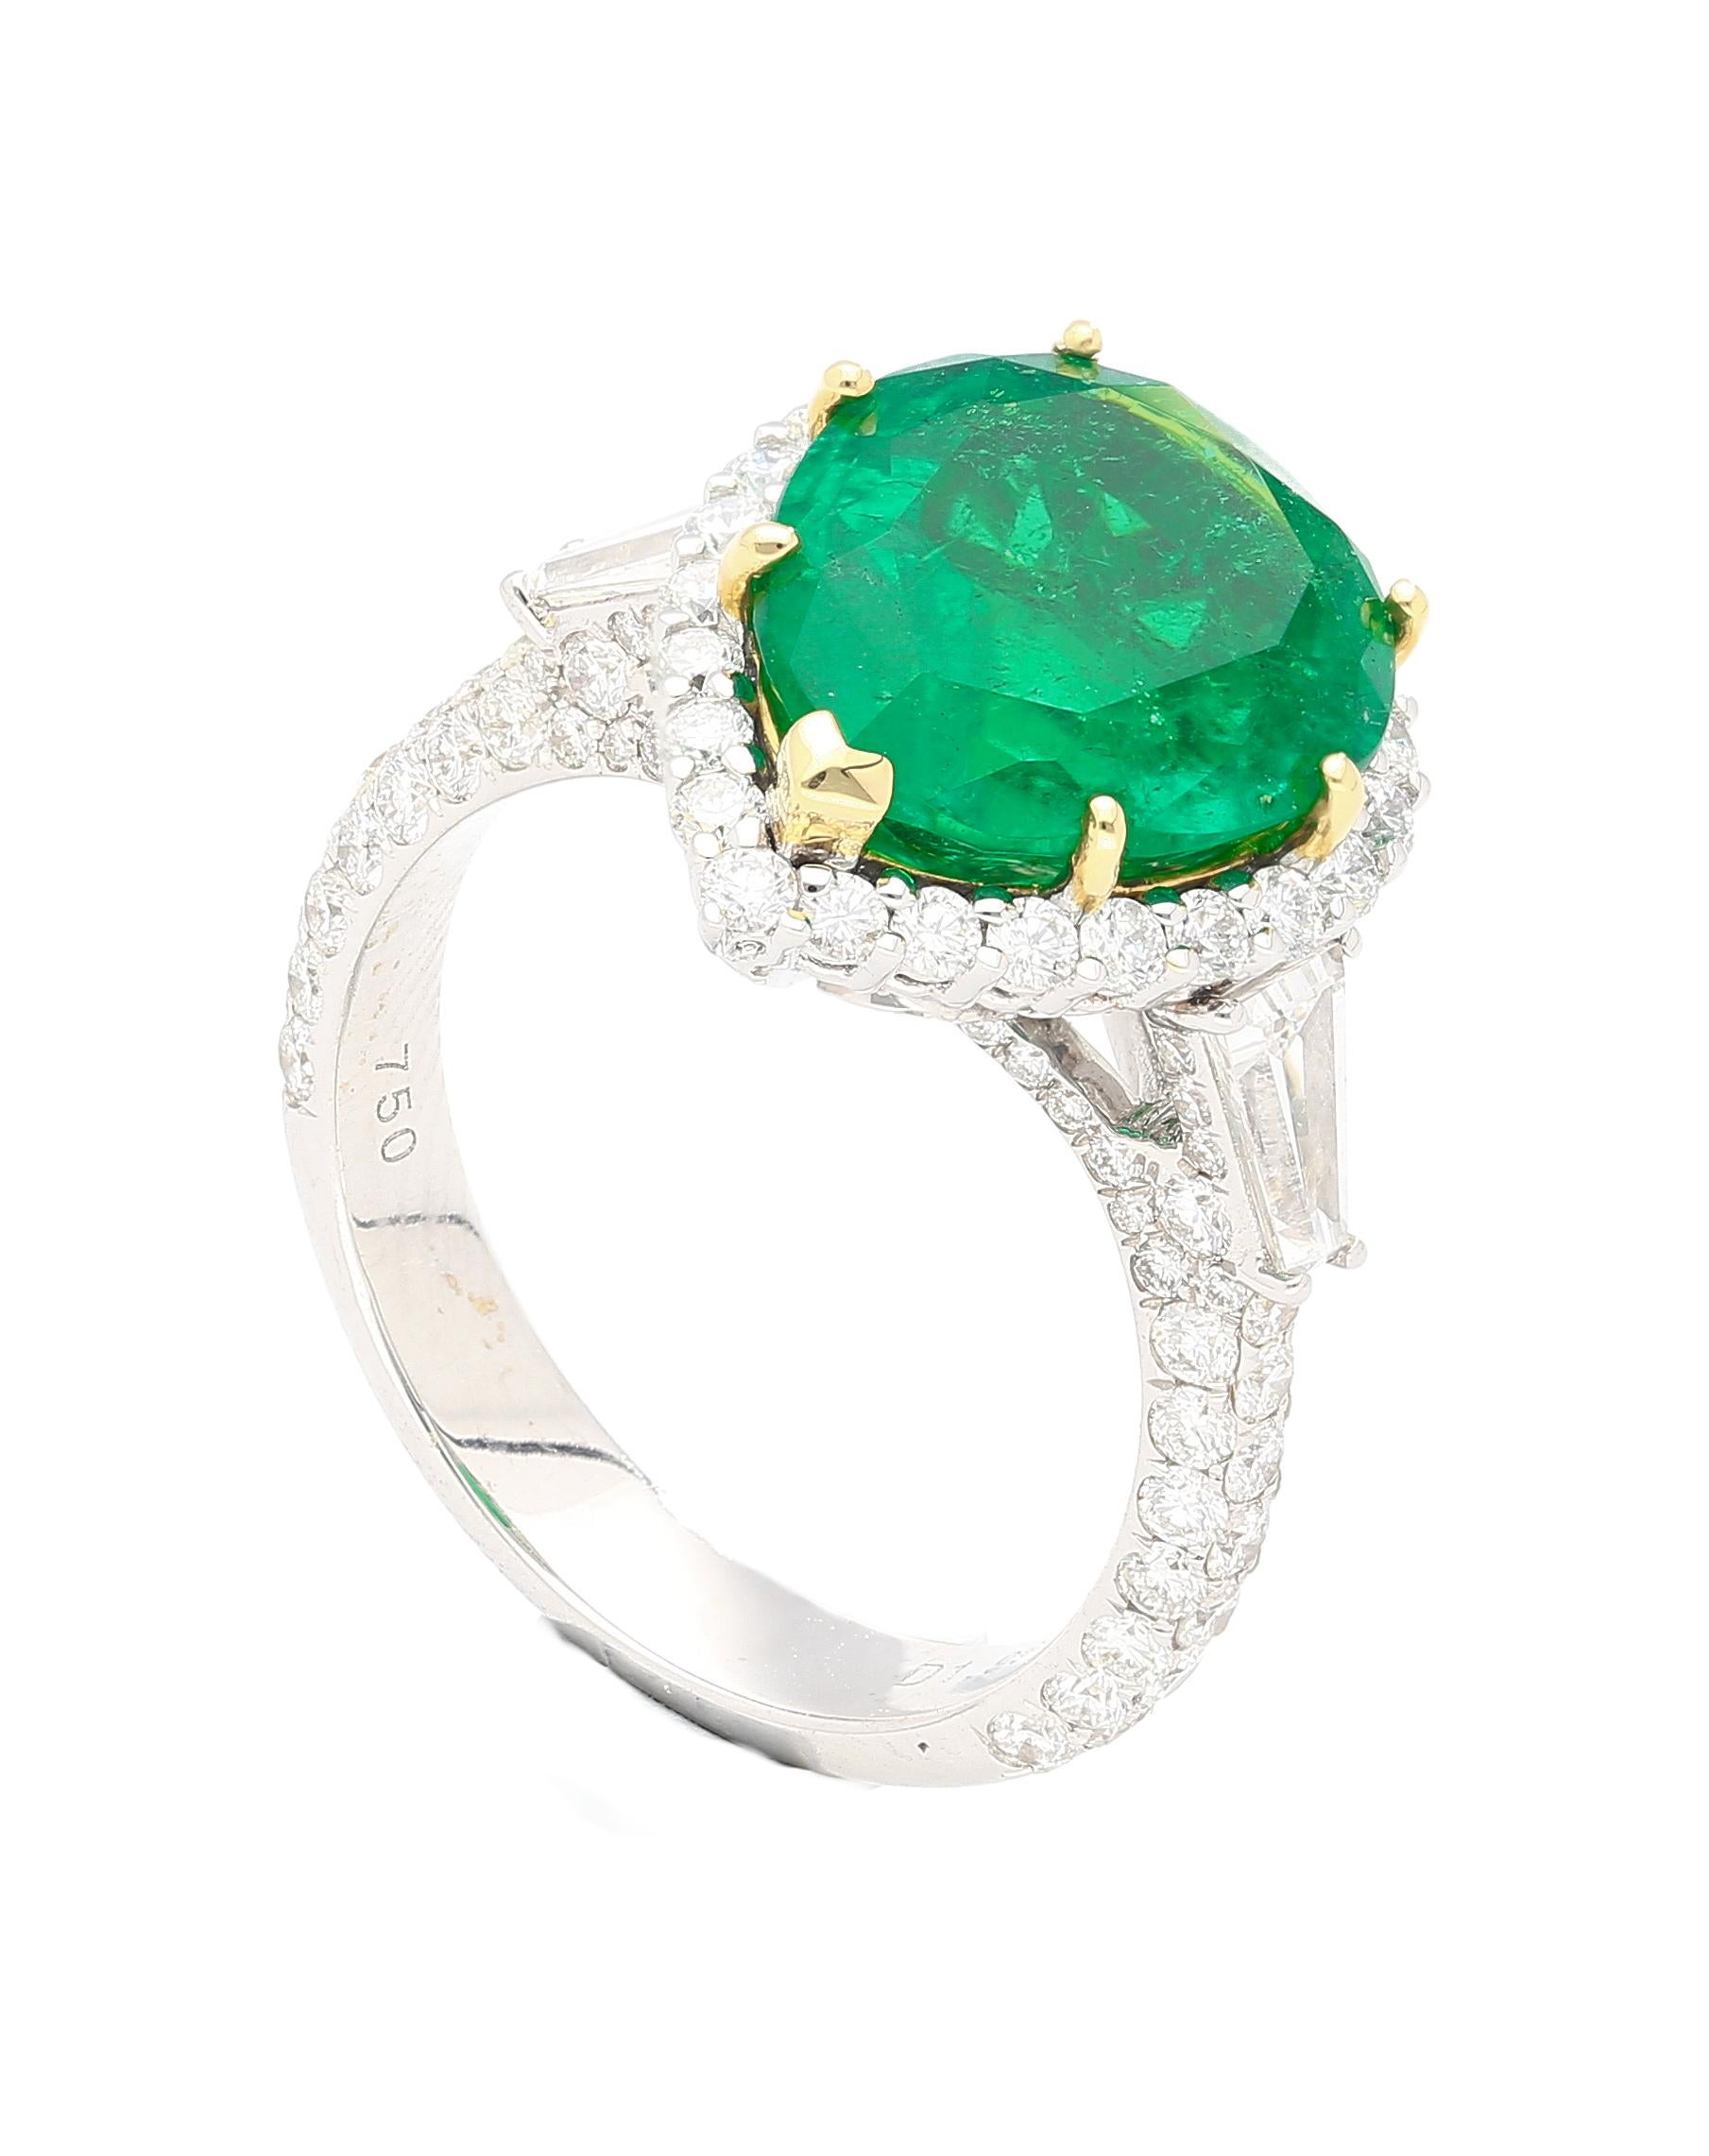 5.12 Carat Vivid Green Pear Cut Colombian Emerald and Diamond Ring in 18K Gold For Sale 1